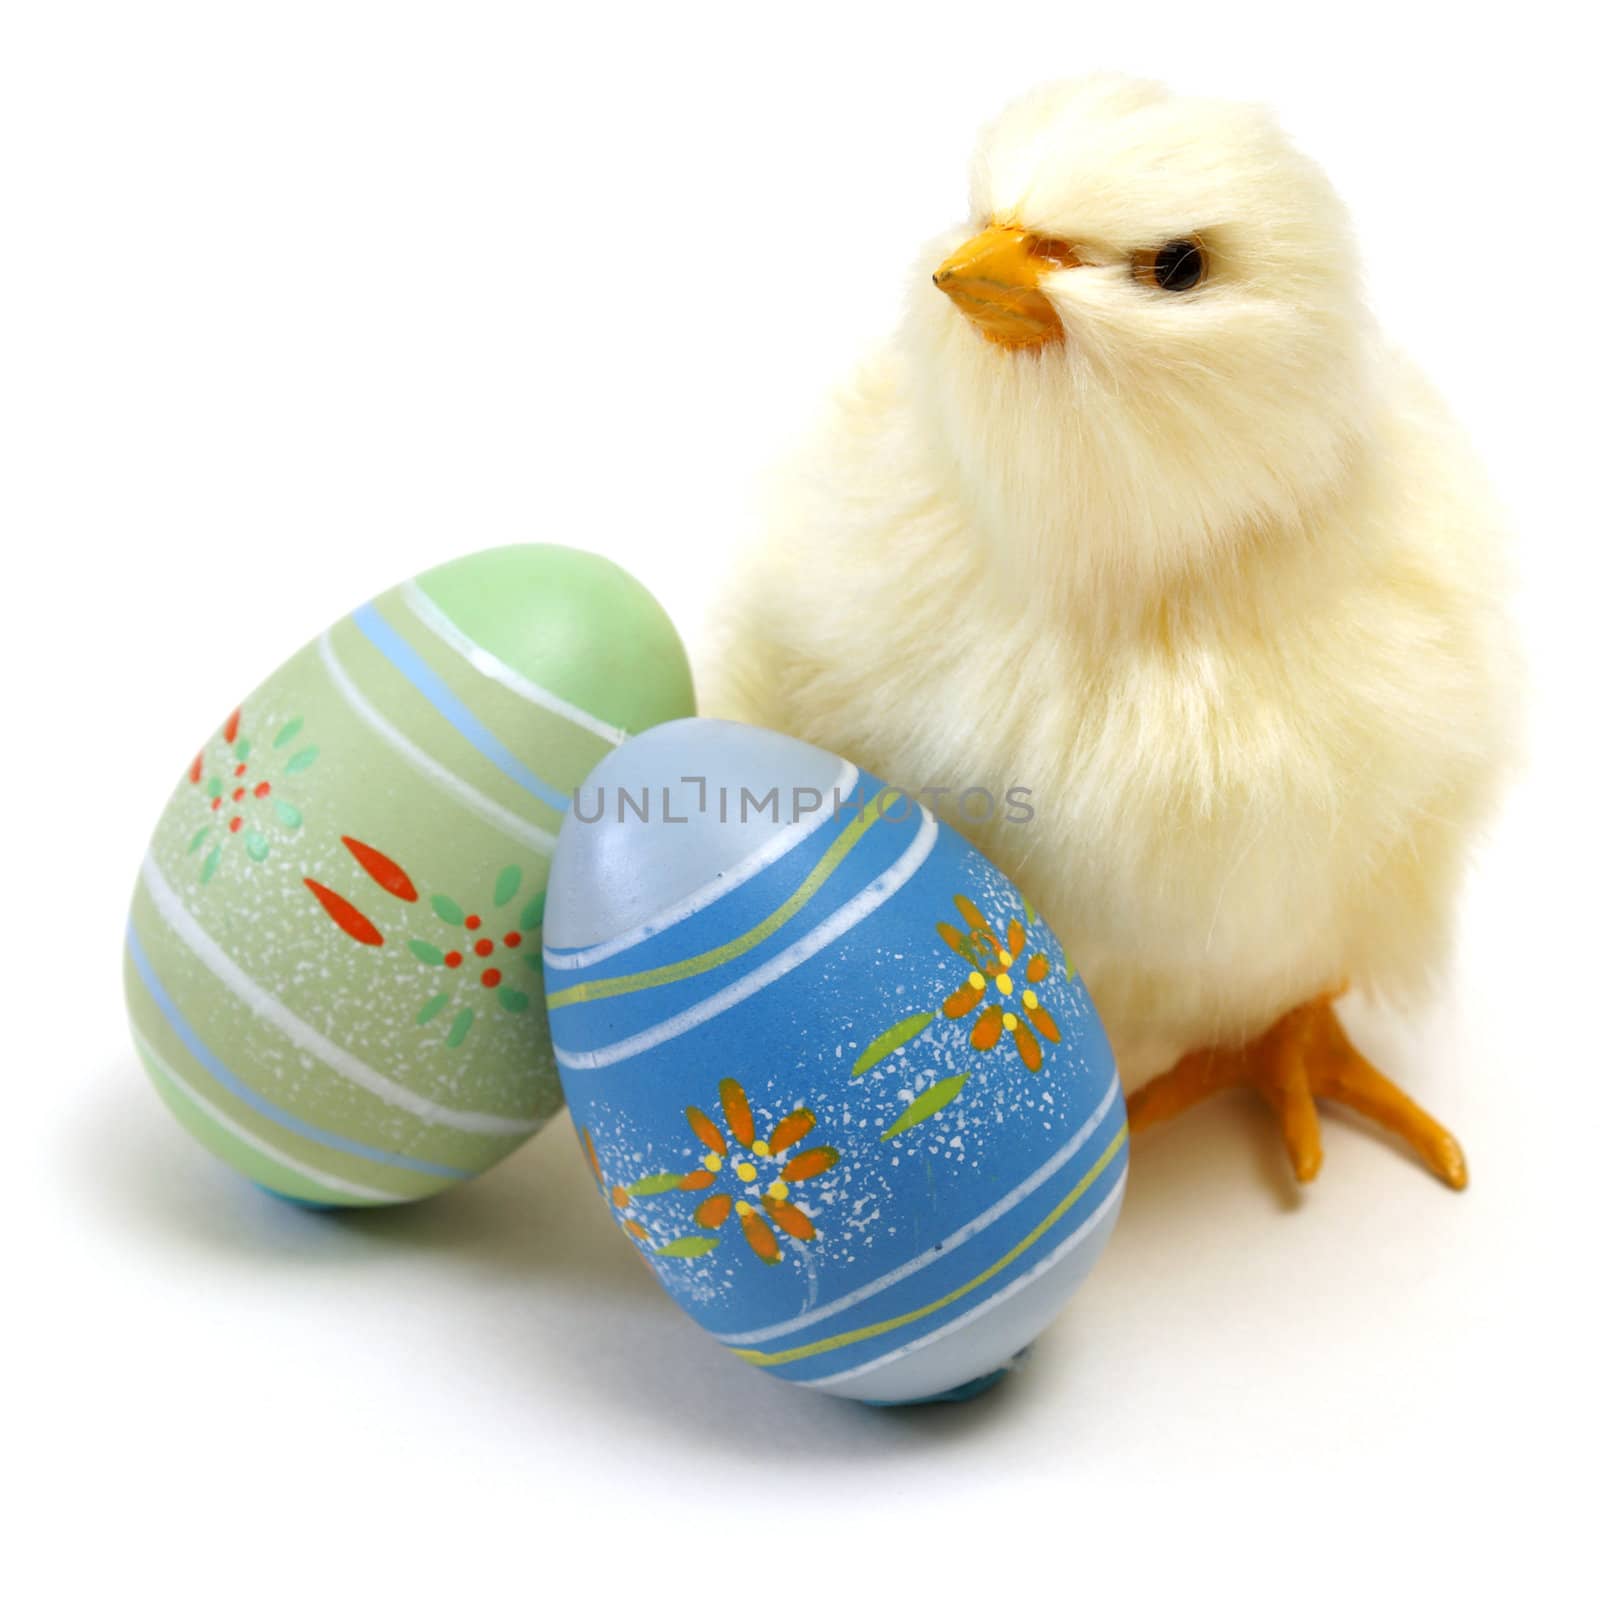 An isolated shot of an Easter chick and some eggs for the seasonal holiday.